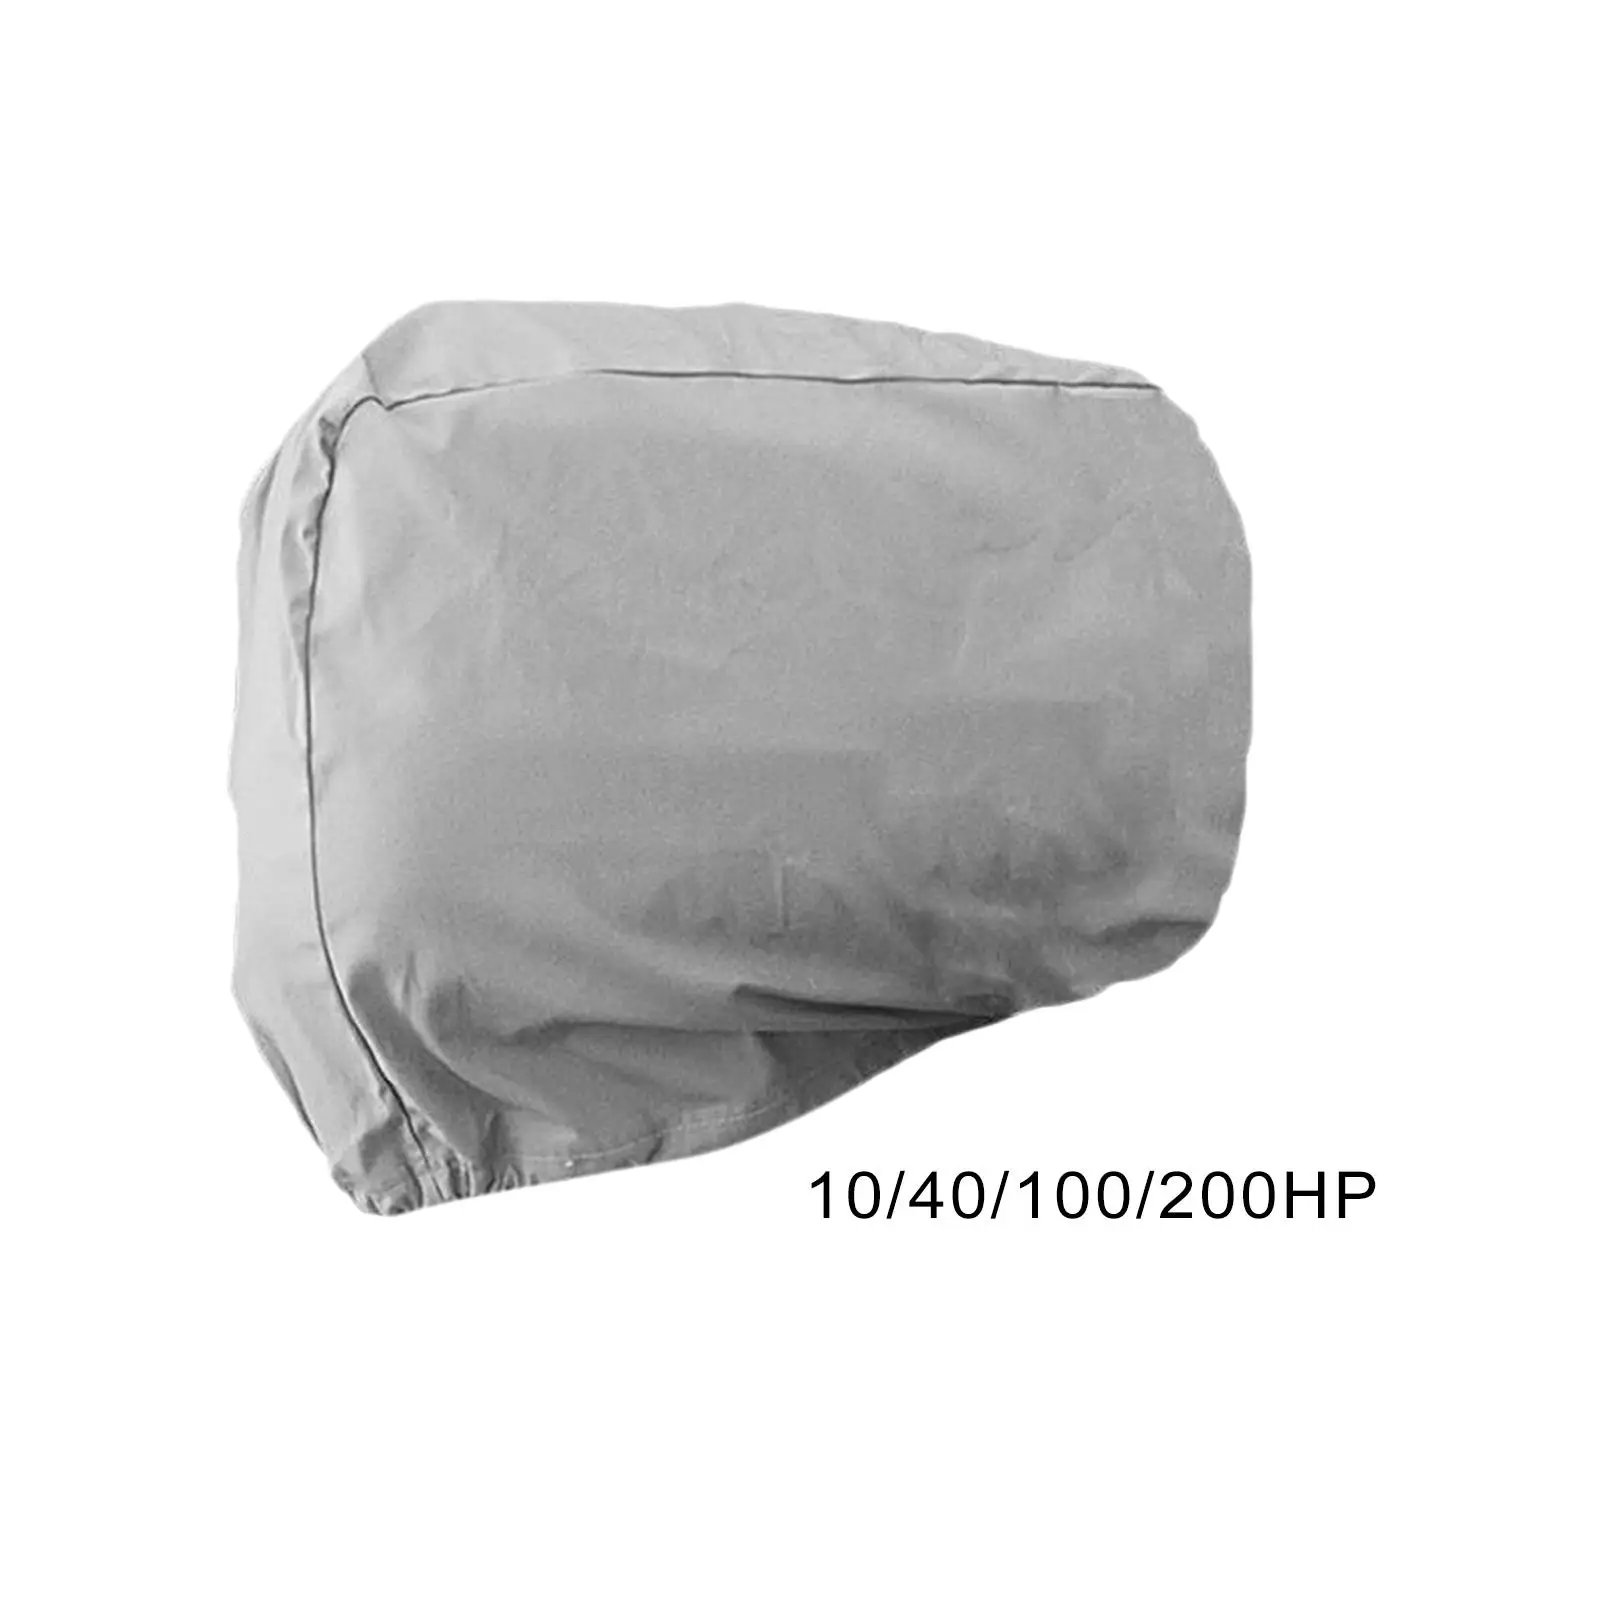 Boat Hood Covers Waterproof Weather Resistant Outboard Motor Cover for Boats